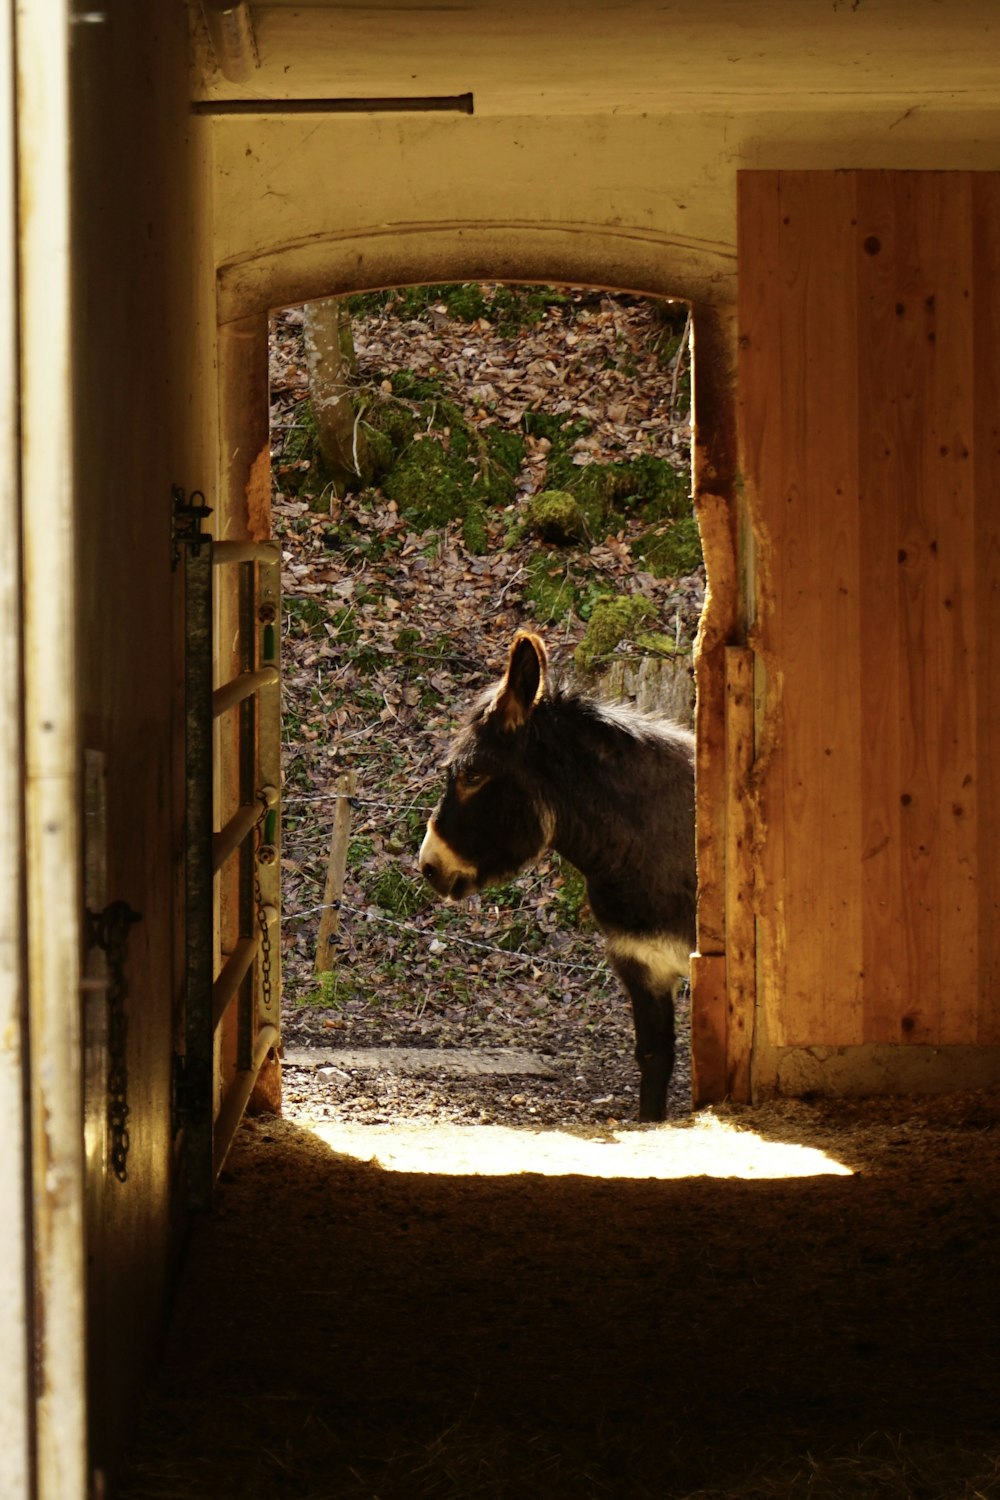 a donkey standing in a doorway of a building